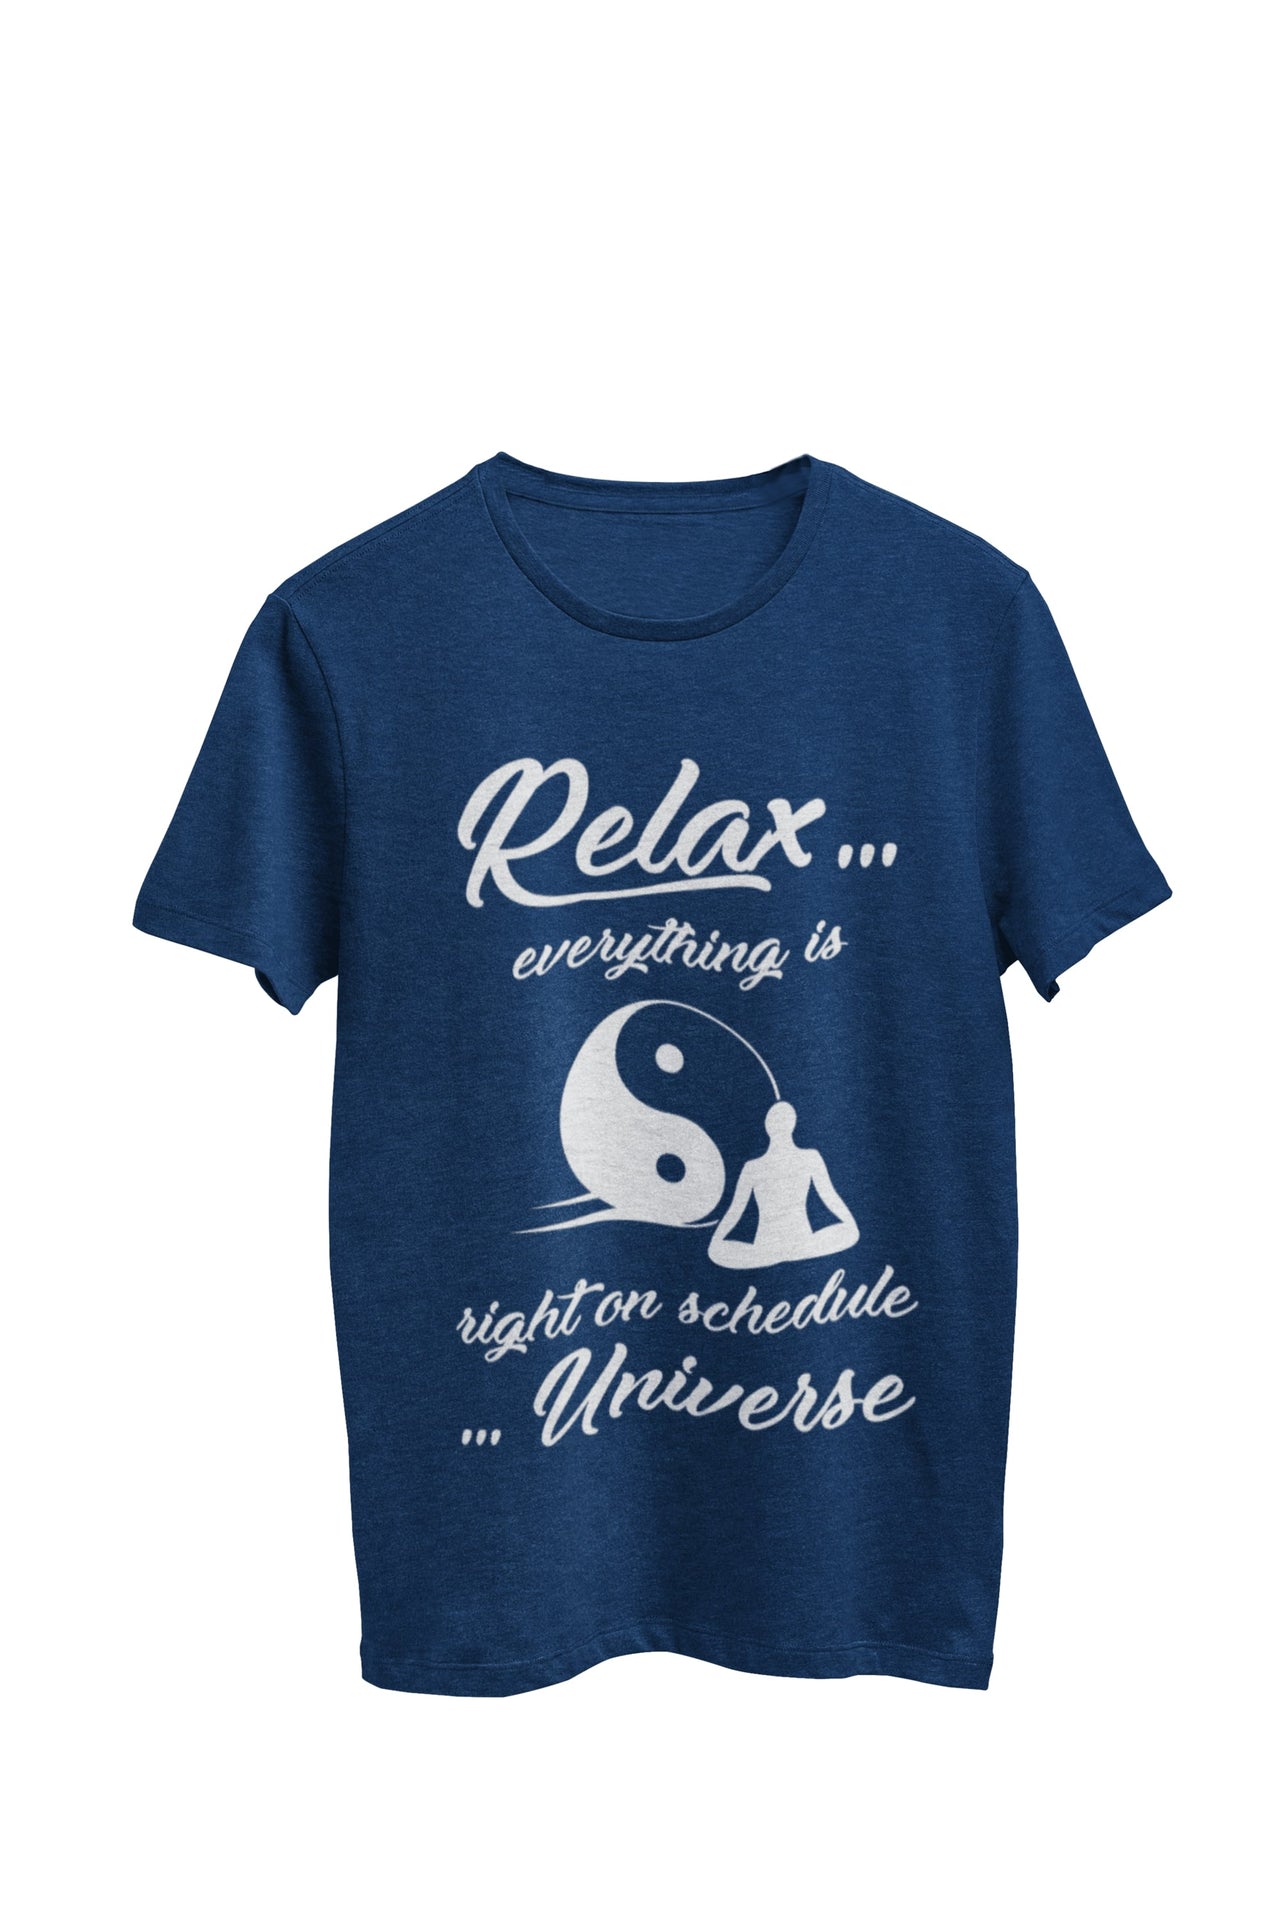 Navy heather unisex tee featuring a person doing yoga, with the text 'Relax, everything is right on schedule' and 'universe' written on the t-shirt. Made by WooHoo Apparel.